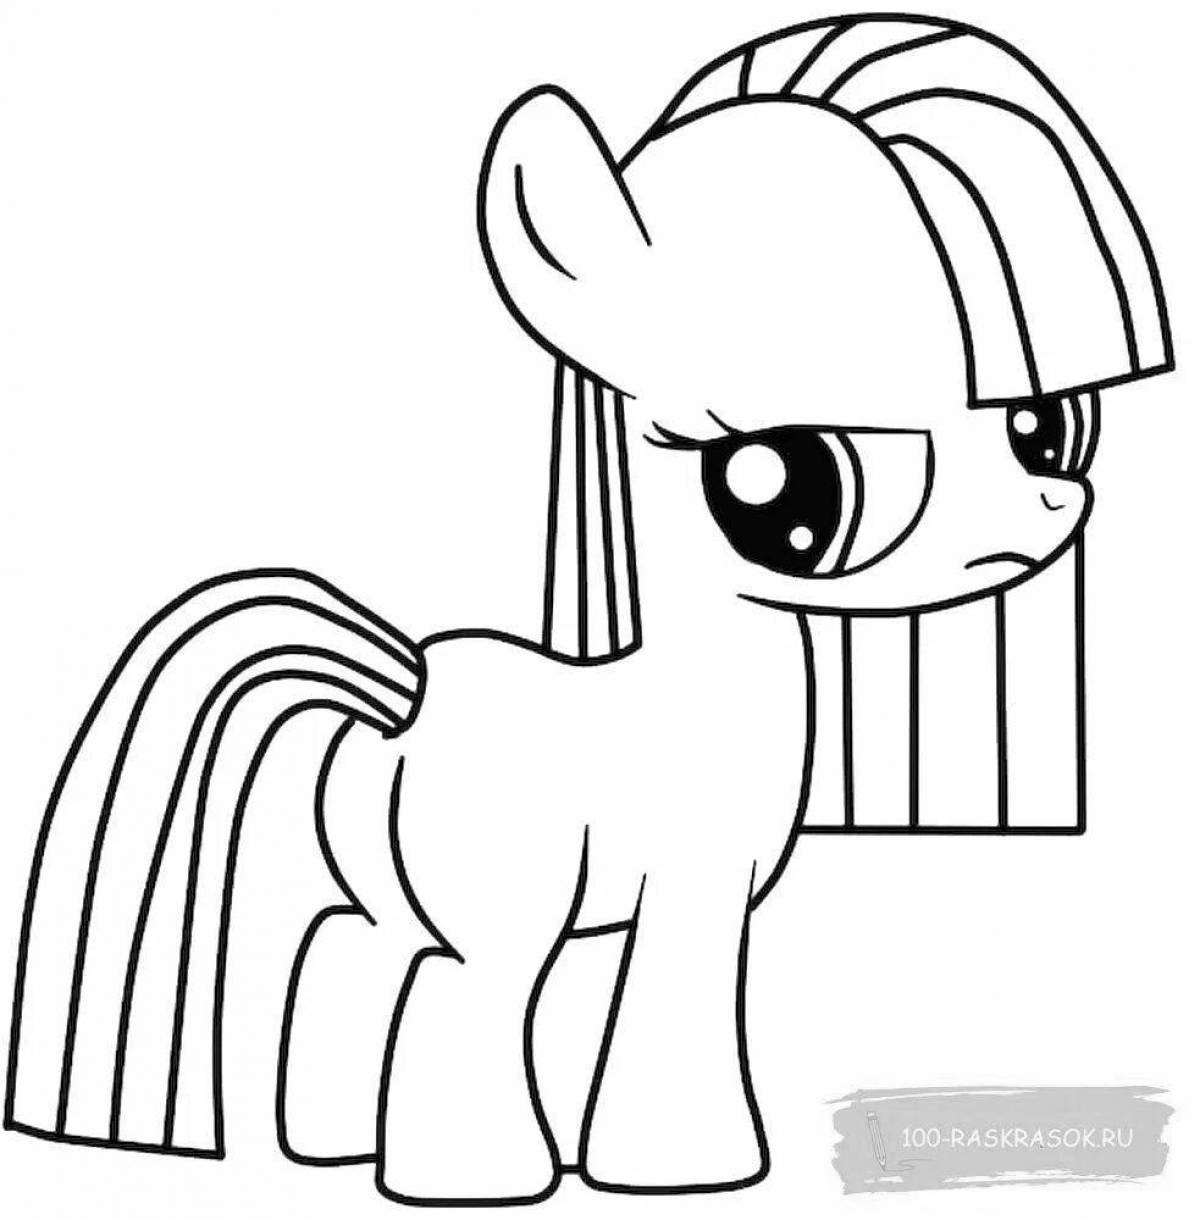 Ponyville pony coloring page